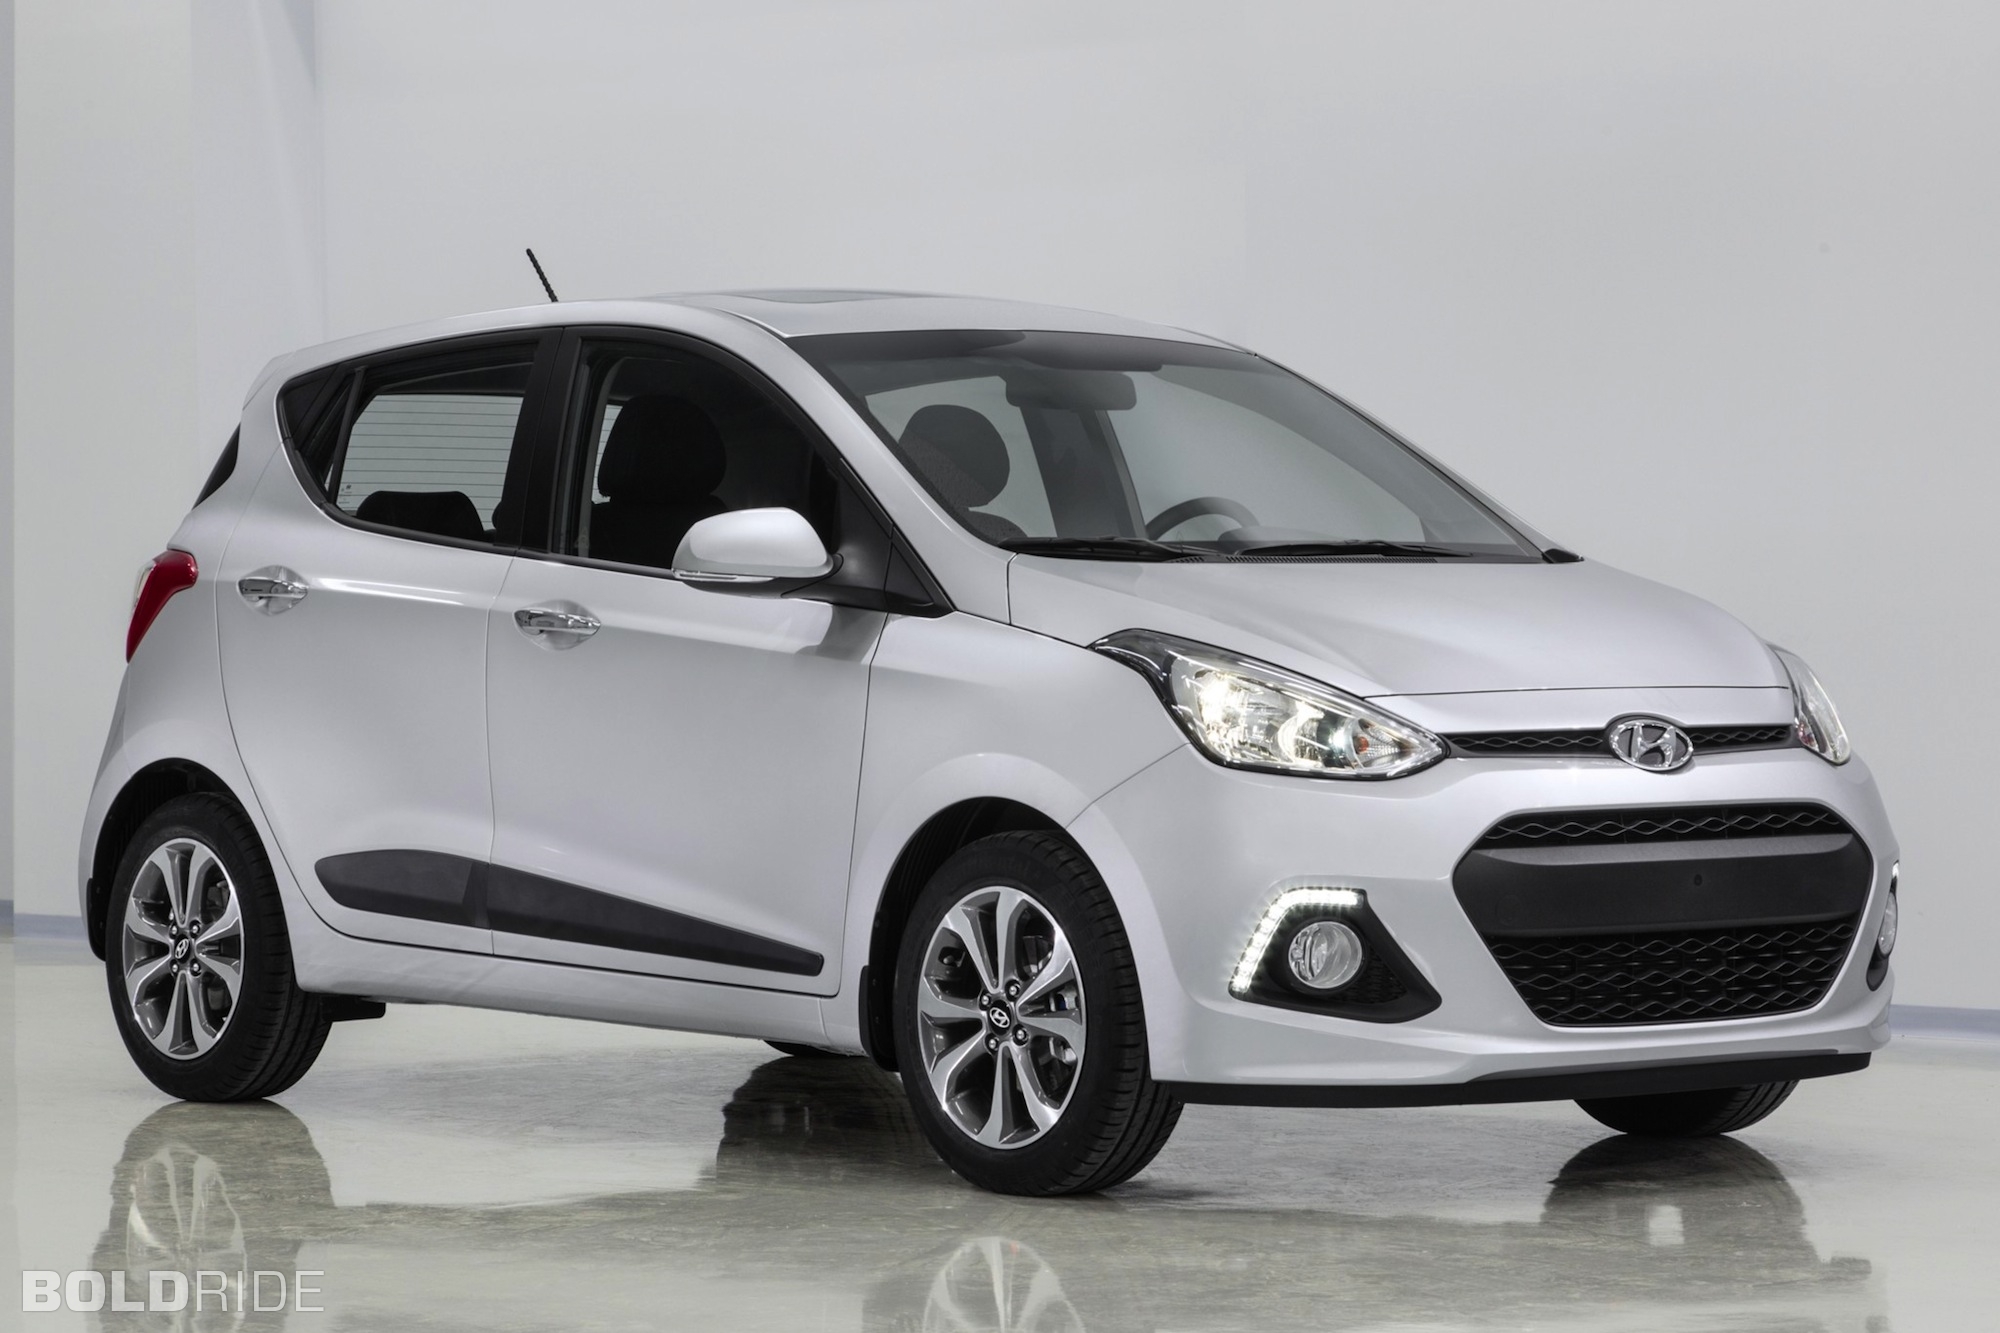 2014 Hyundai i10 Images | Pictures and Videos